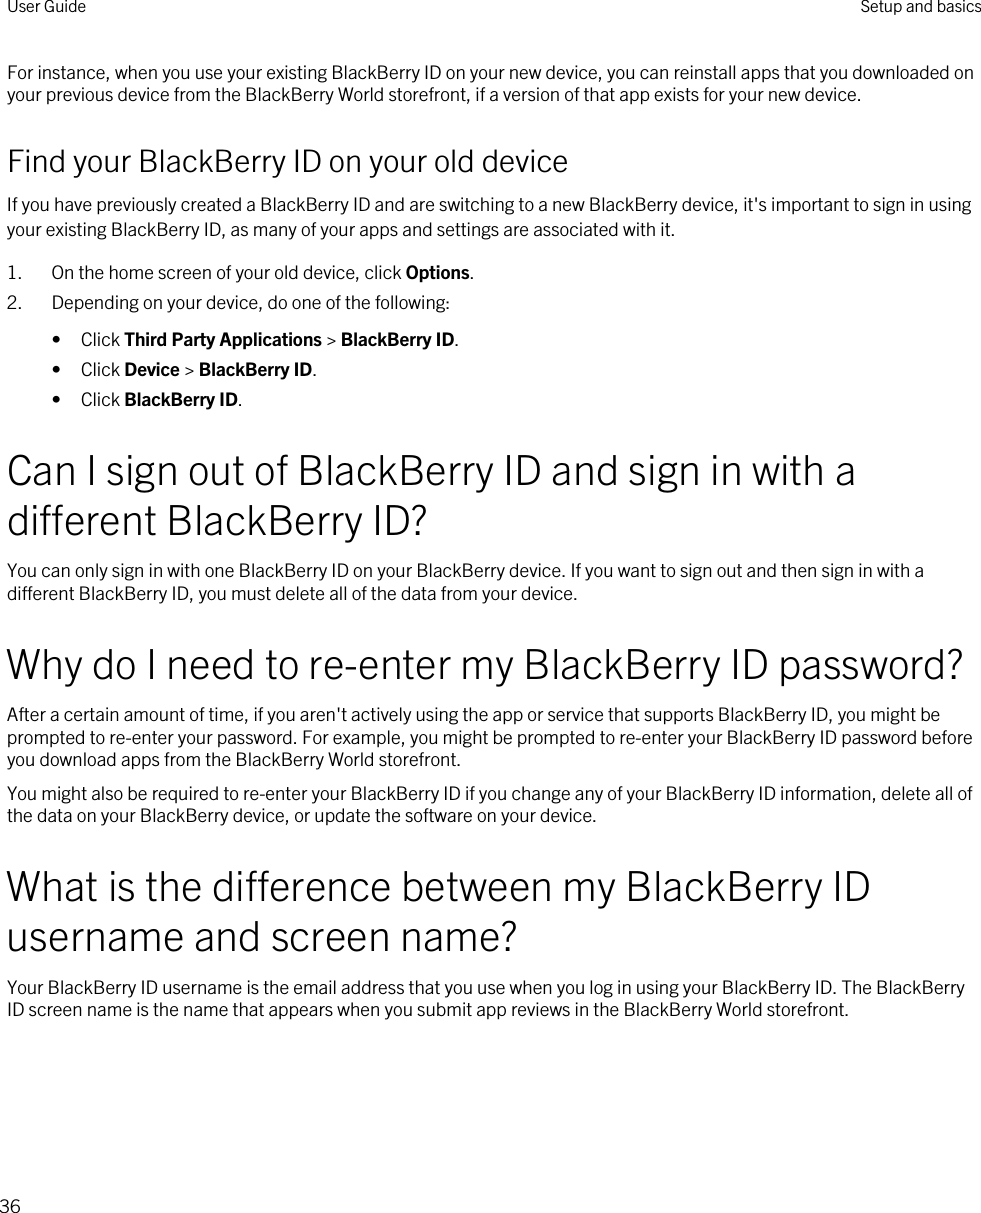 For instance, when you use your existing BlackBerry ID on your new device, you can reinstall apps that you downloaded on your previous device from the BlackBerry World storefront, if a version of that app exists for your new device.Find your BlackBerry ID on your old deviceIf you have previously created a BlackBerry ID and are switching to a new BlackBerry device, it&apos;s important to sign in using your existing BlackBerry ID, as many of your apps and settings are associated with it.1. On the home screen of your old device, click Options.2. Depending on your device, do one of the following:• Click Third Party Applications &gt; BlackBerry ID.• Click Device &gt; BlackBerry ID.• Click BlackBerry ID.Can I sign out of BlackBerry ID and sign in with a different BlackBerry ID?You can only sign in with one BlackBerry ID on your BlackBerry device. If you want to sign out and then sign in with a different BlackBerry ID, you must delete all of the data from your device.Why do I need to re-enter my BlackBerry ID password?After a certain amount of time, if you aren&apos;t actively using the app or service that supports BlackBerry ID, you might be prompted to re-enter your password. For example, you might be prompted to re-enter your BlackBerry ID password before you download apps from the BlackBerry World storefront.You might also be required to re-enter your BlackBerry ID if you change any of your BlackBerry ID information, delete all of the data on your BlackBerry device, or update the software on your device.What is the difference between my BlackBerry ID username and screen name?Your BlackBerry ID username is the email address that you use when you log in using your BlackBerry ID. The BlackBerry ID screen name is the name that appears when you submit app reviews in the BlackBerry World storefront.User Guide Setup and basics36